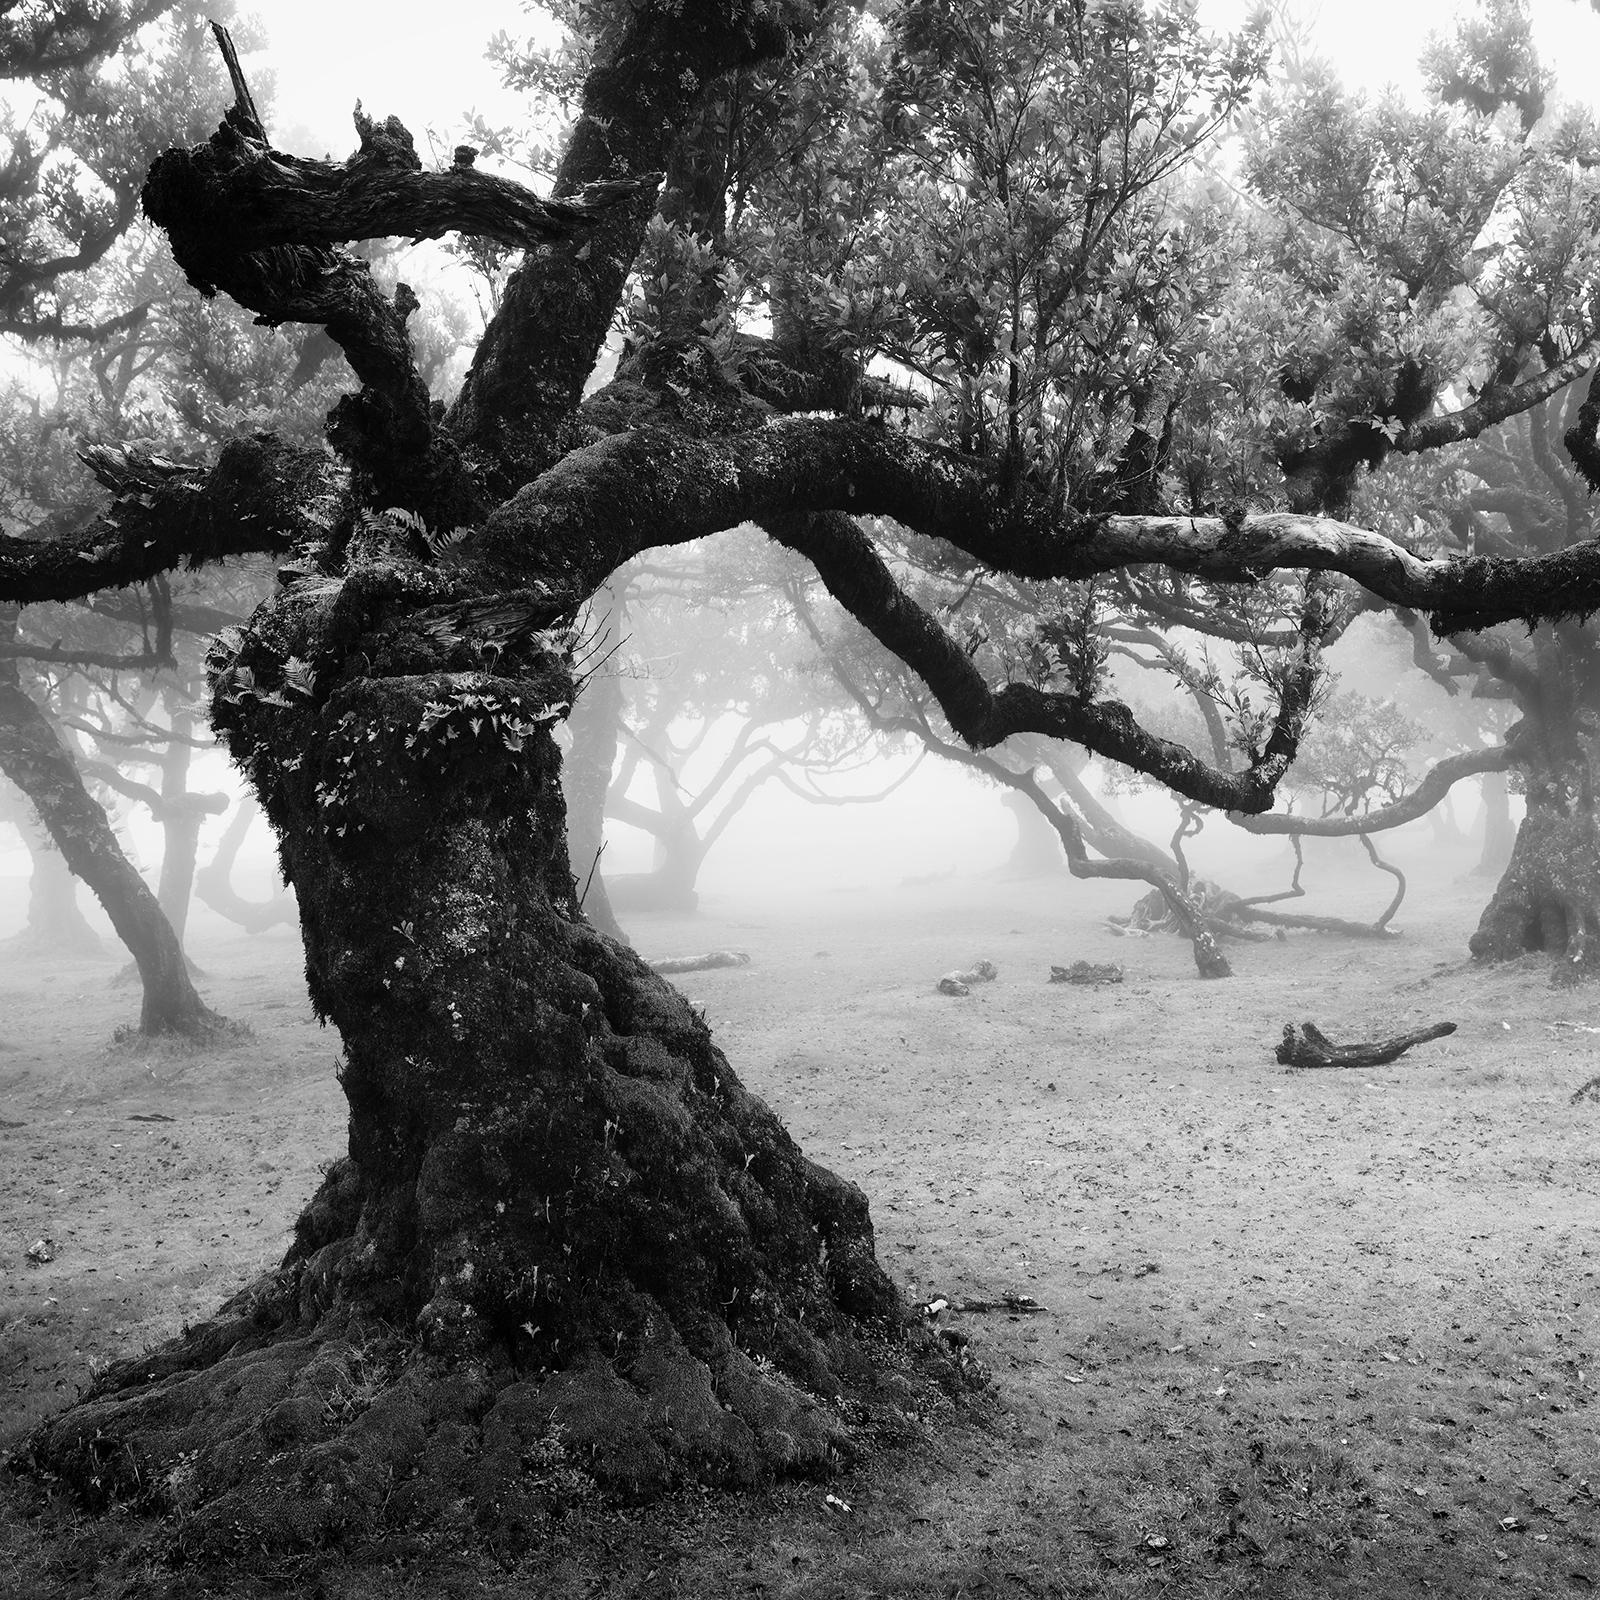 Black and white fine art landscape photography. Old tree in the fog on the mystical island of Madeira, Portugal. Archival pigment ink print, edition of 7. Signed, titled, dated and numbered by artist. Certificate of authenticity included. Printed